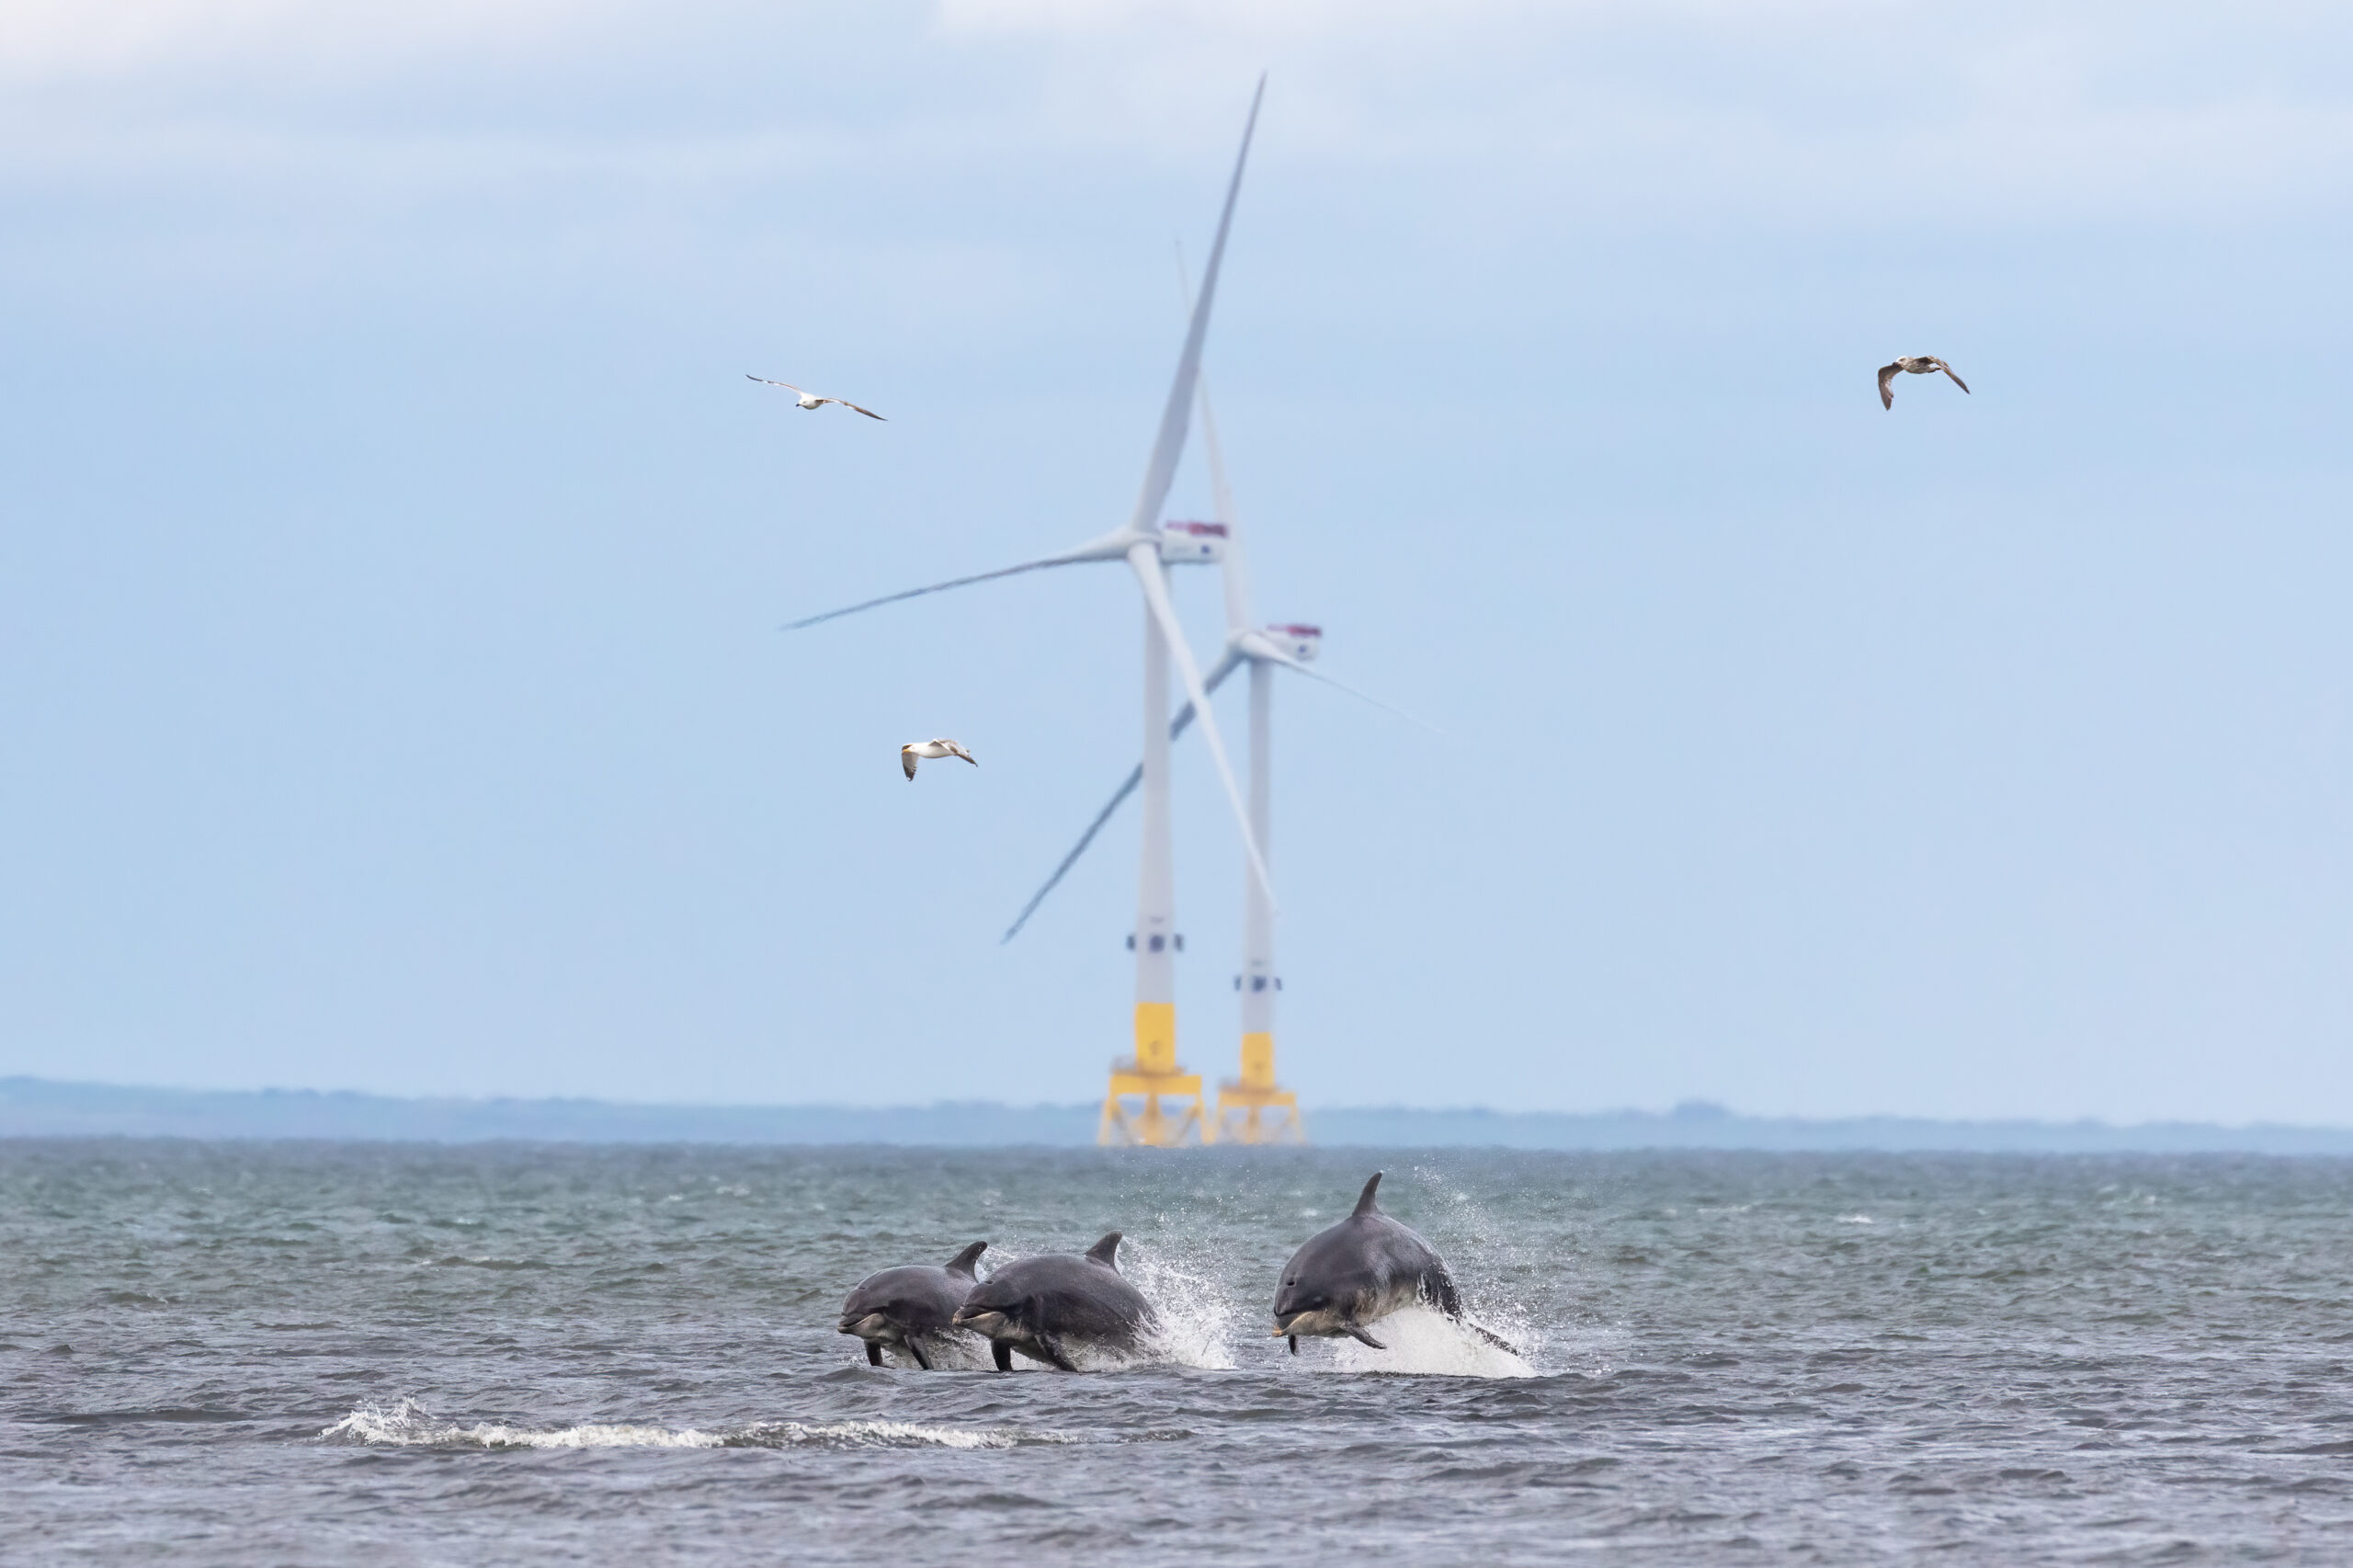 AREG NEWS: Aberdeen Renewable Energy Group has announced the winner of its ‘Art of Renewable Energy’ photography competition.